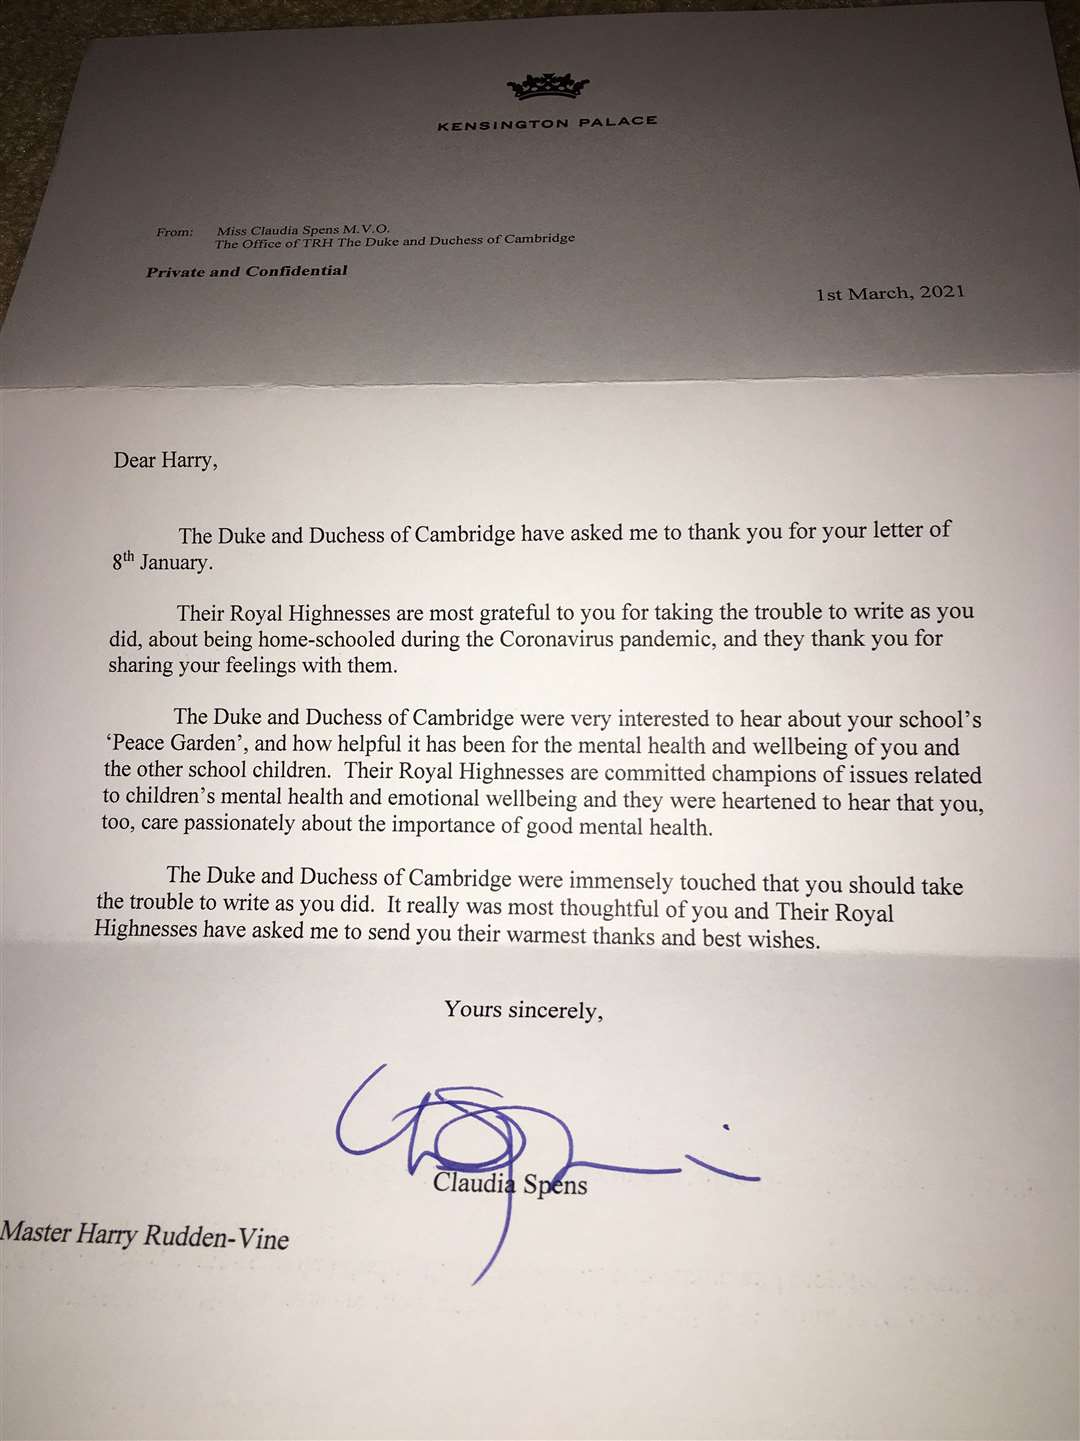 The Duke and Duchess' letter to Harry Rudden-Vine, a seven-year-old from Shorne. Picture: Clair Rudden-Vine